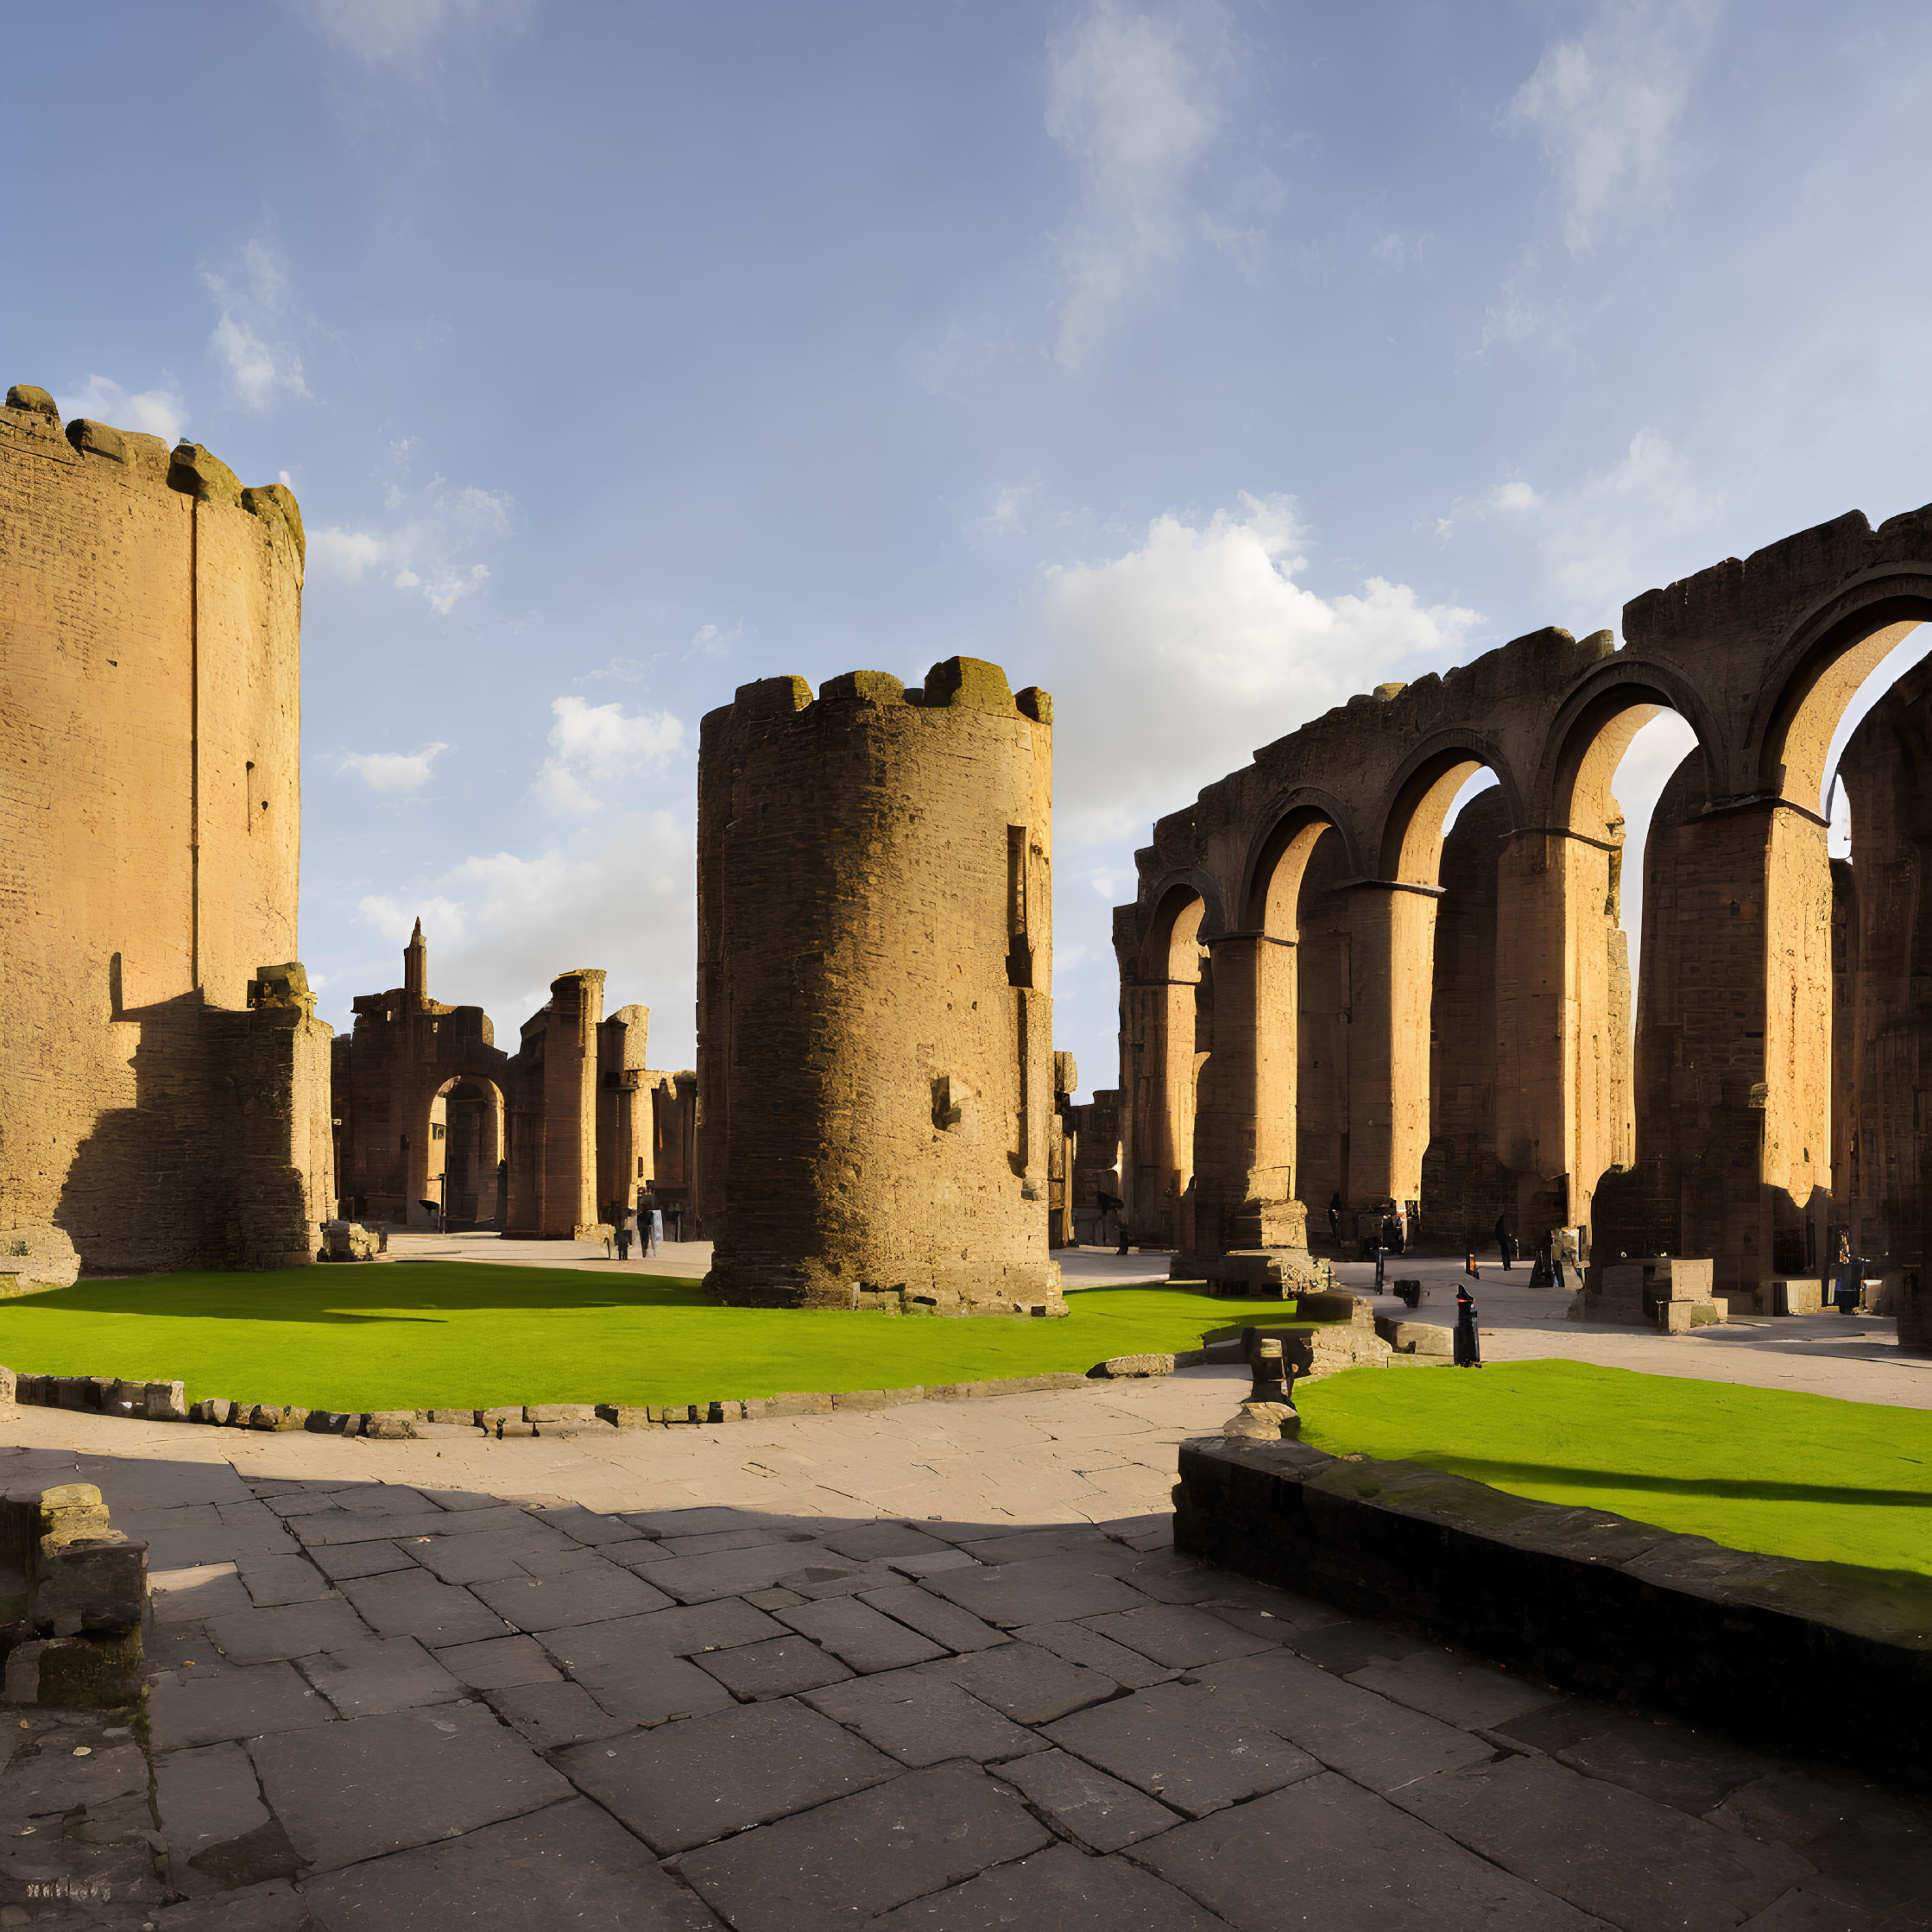 Ancient ruins with tall archways and columns under clear blue sky